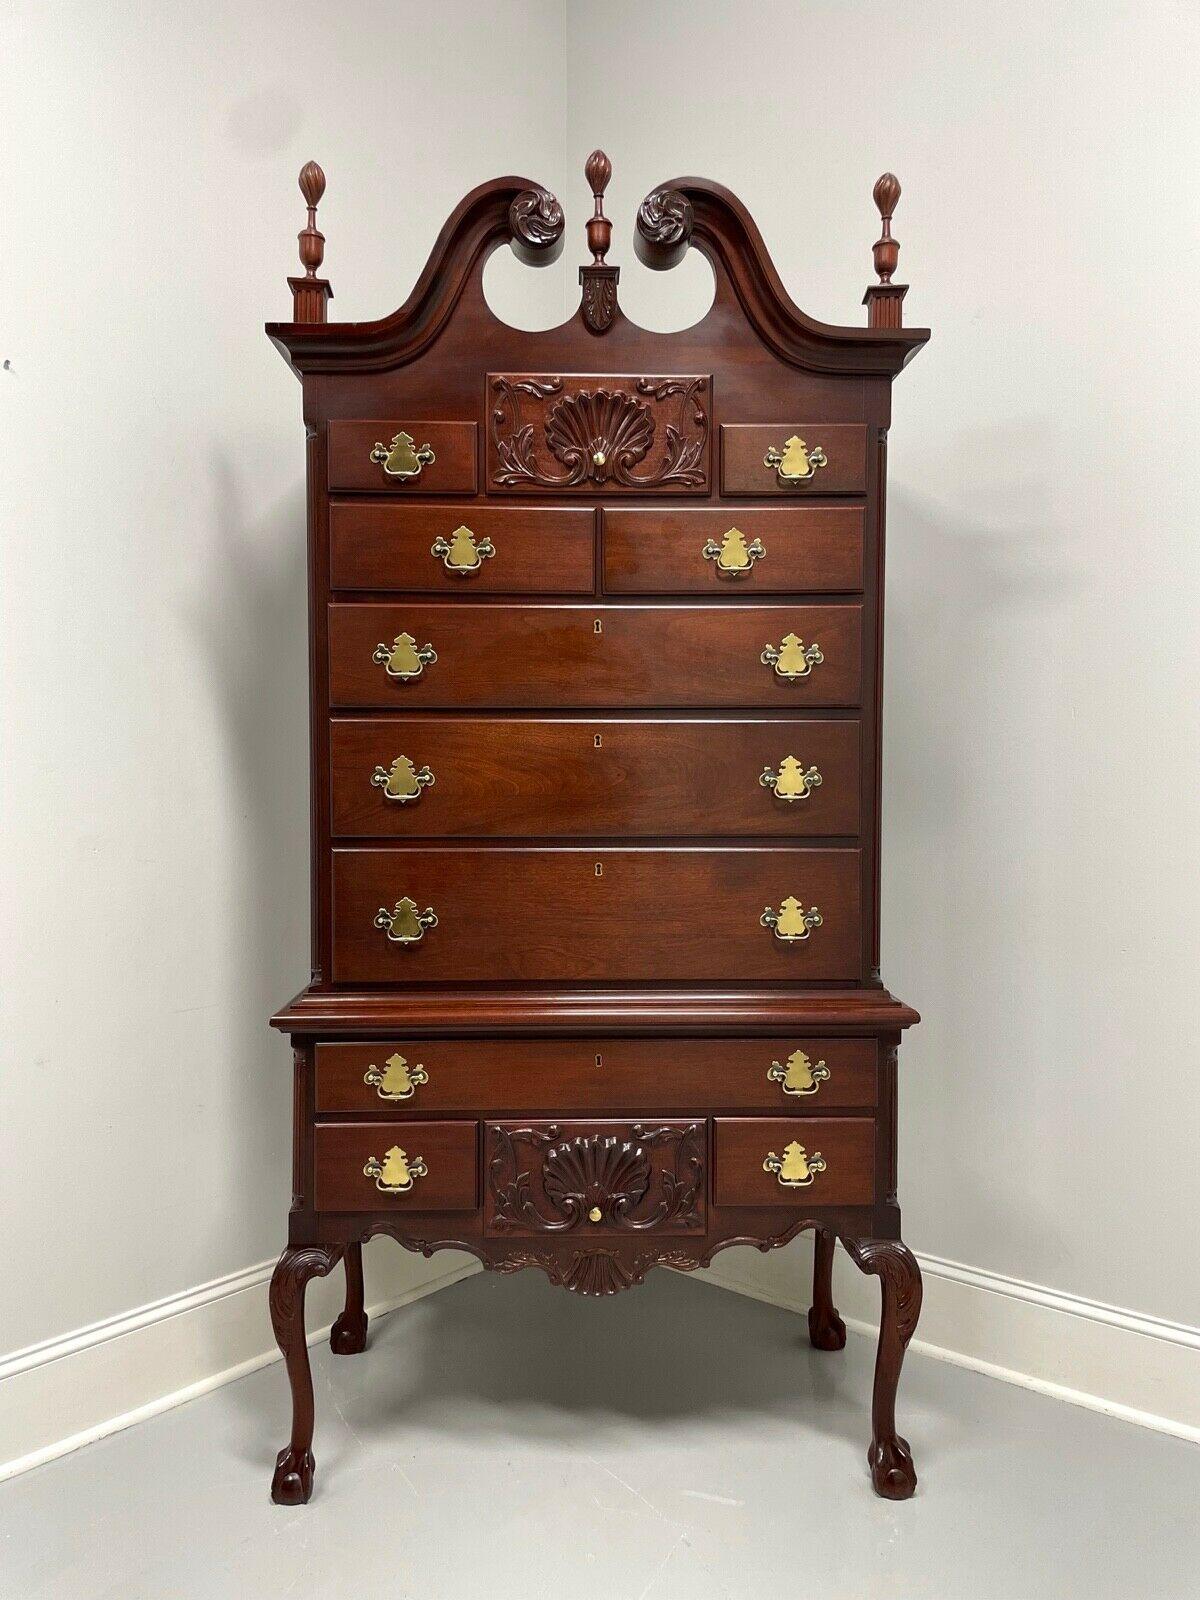 CRAFTIQUE Solid Mahogany Philadelphia Highboy Chest with Ball in Claw Feet For Sale 9